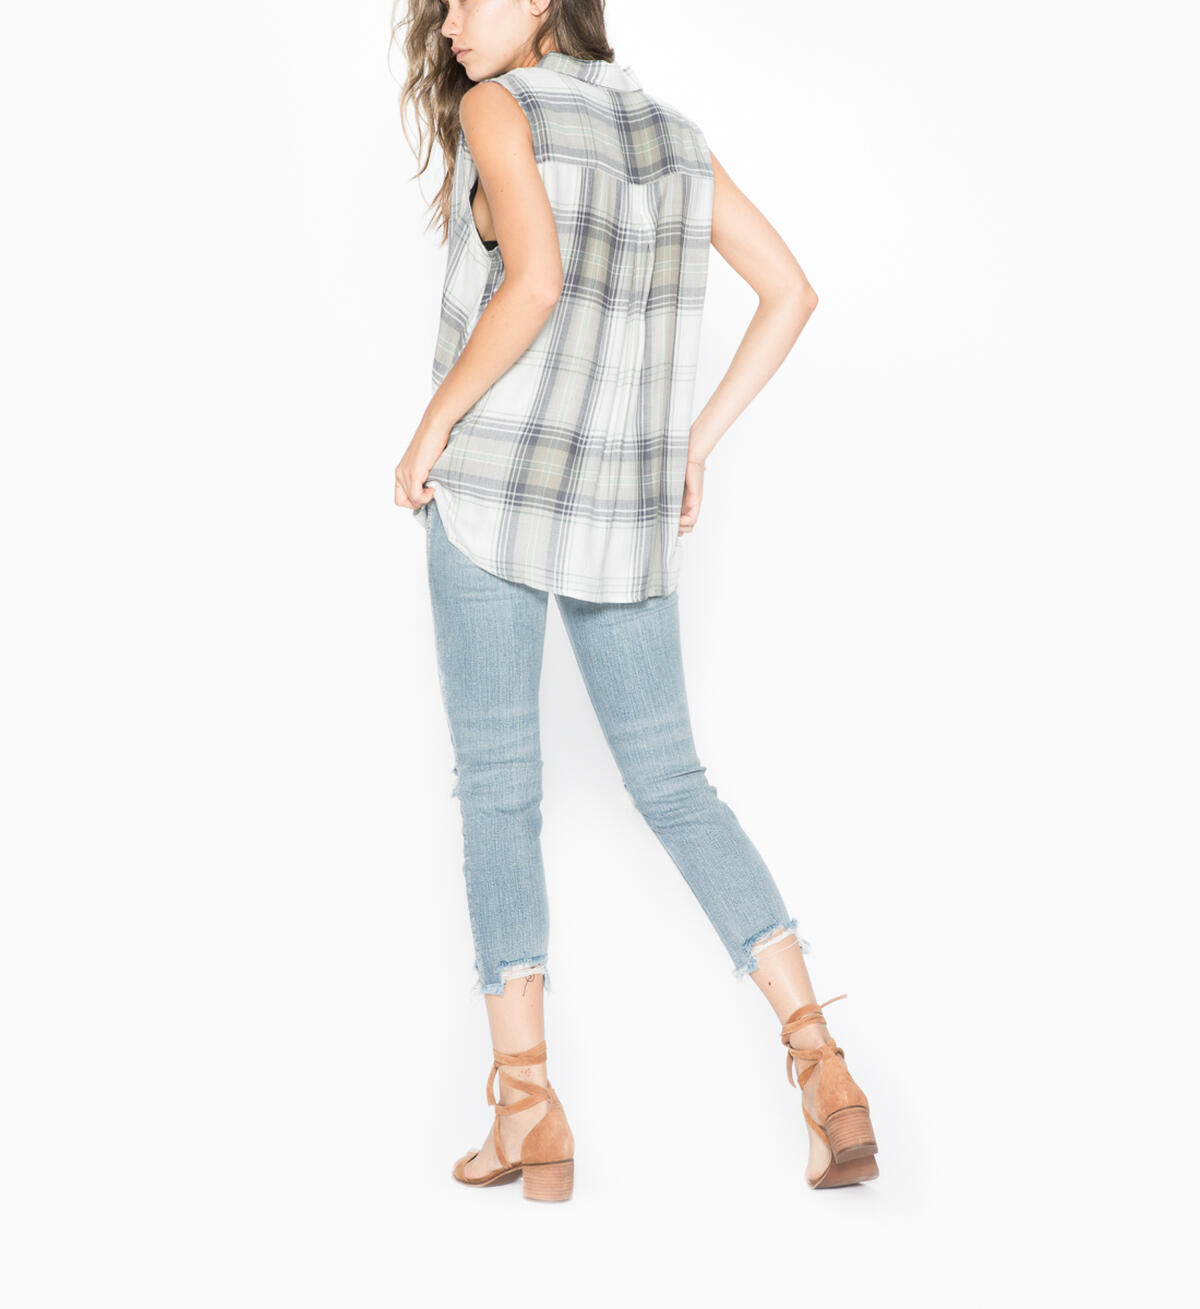 Simone - Twisted Front Plaid Tank, , hi-res image number 2